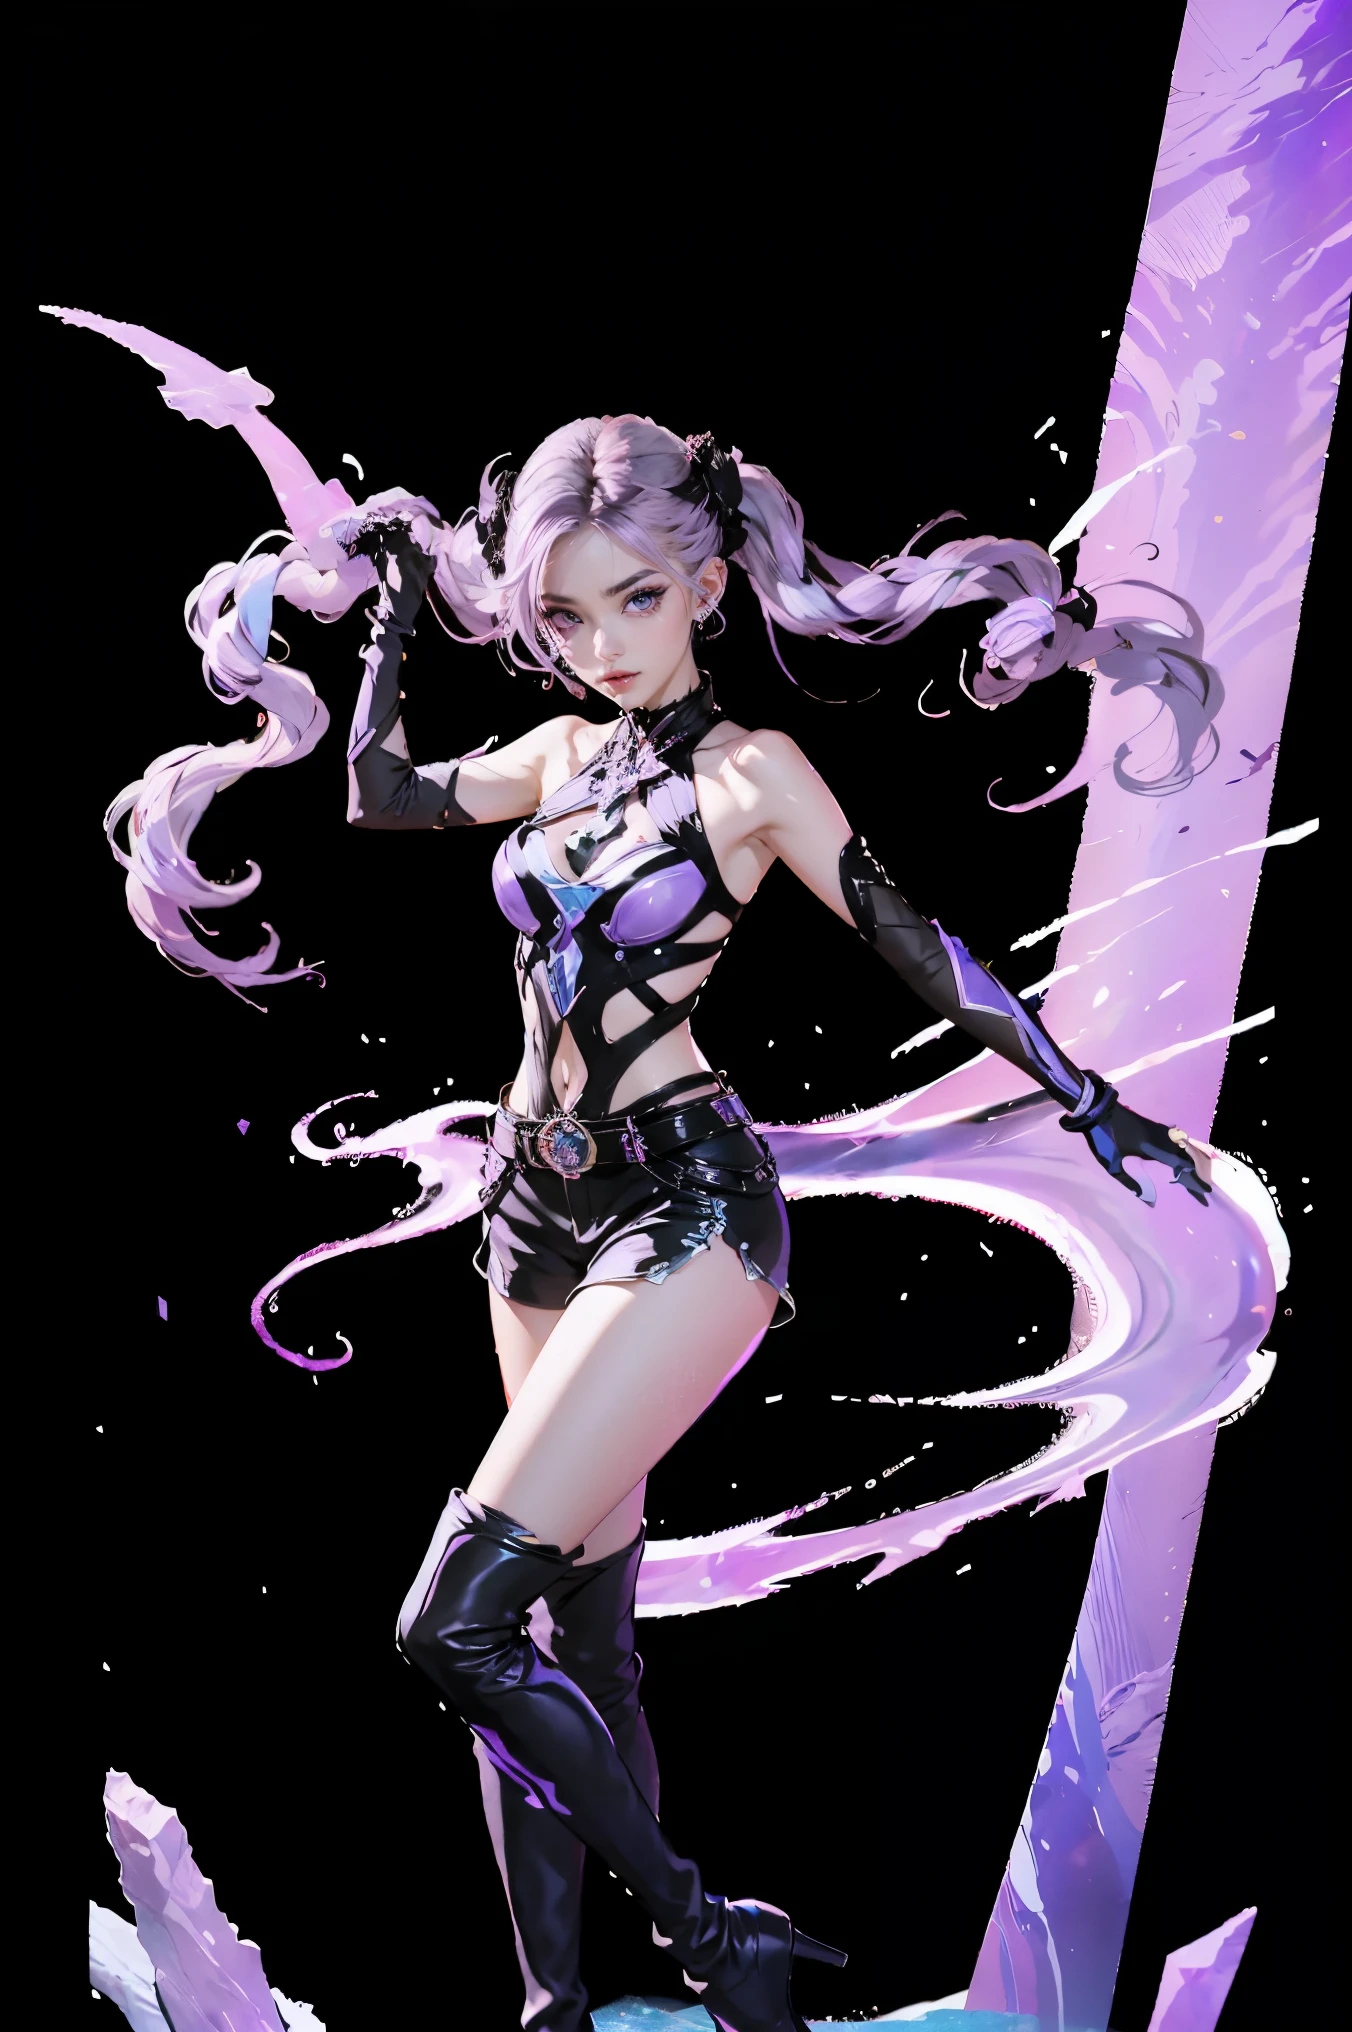 ,Best Quality, Ultra High Resolution, Cute, (KPOP Idol), (Long Twintail), (Light Purple Hair:1), ((Big Eyes)), Looking at you, BREAK ((upper body:1.3)), Front View,A character with long, flowing silver hair and a slender build, wearing a black and white outfit that includes thigh-high boots and gloves. The character is in a dynamic pose surrounded by ethereal purple crystals and energy, The character is in a dynamic pose surrounded by ethereal purple crystals and energy,A character with long, flowing purple hair, wearing a metallic top and black shorts with thigh-high boots. The outfit includes straps and belts, giving it a futuristic or fantasy style. The character is in a dynamic pose with radiant light or energy surrounding them, set against a minimalistic abstract background,
